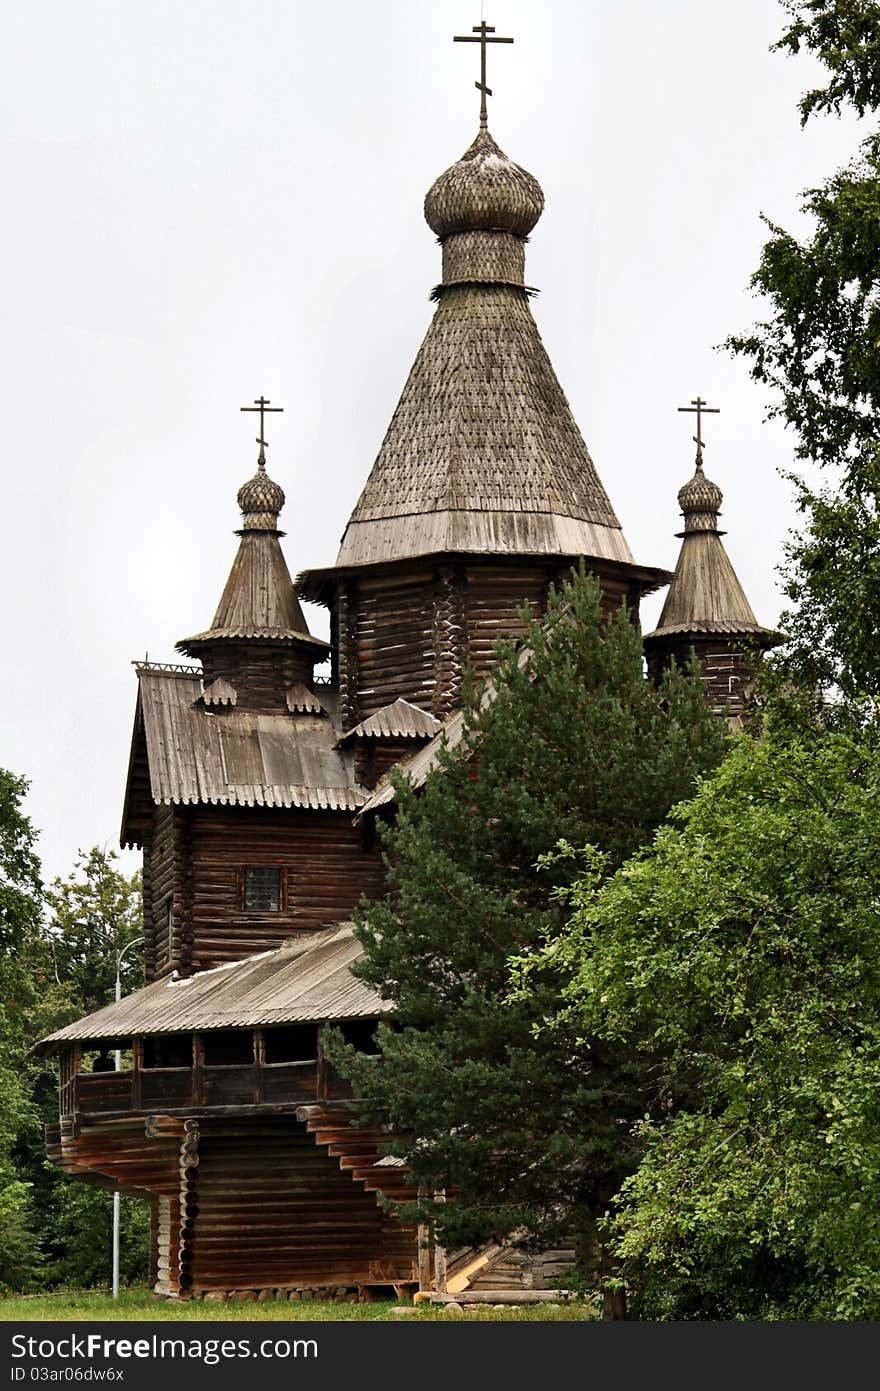 Old wooden Russian orthodox church in open-air museum of wooden architecture in a village called Vitoslavlitsy near Veliky Novgorod, Russia. Old wooden Russian orthodox church in open-air museum of wooden architecture in a village called Vitoslavlitsy near Veliky Novgorod, Russia